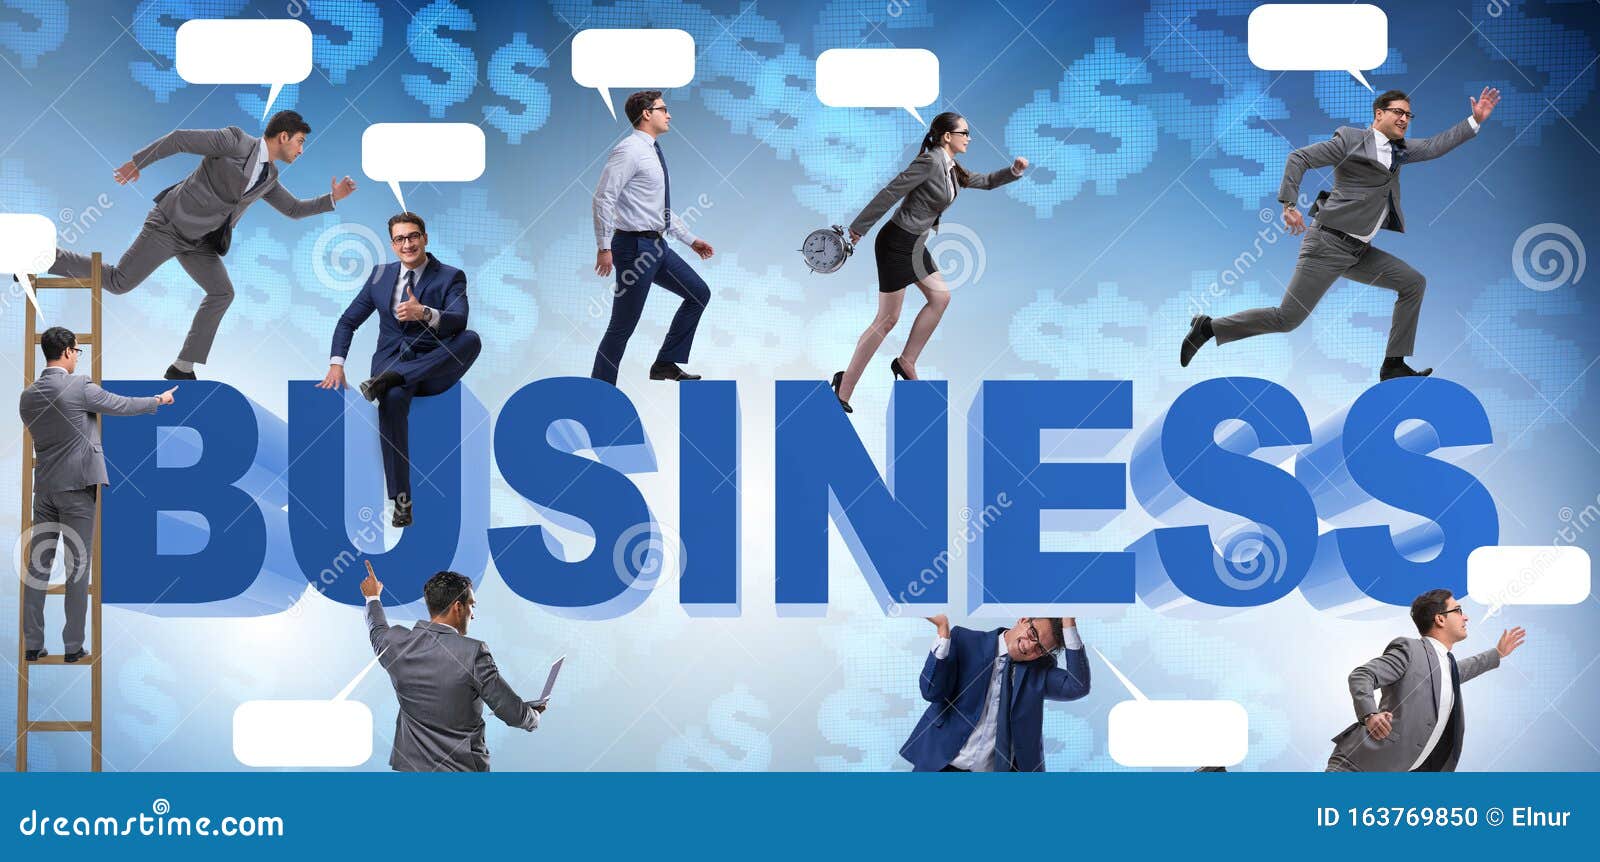 the businessmen in business concept with ladder and bubble callo